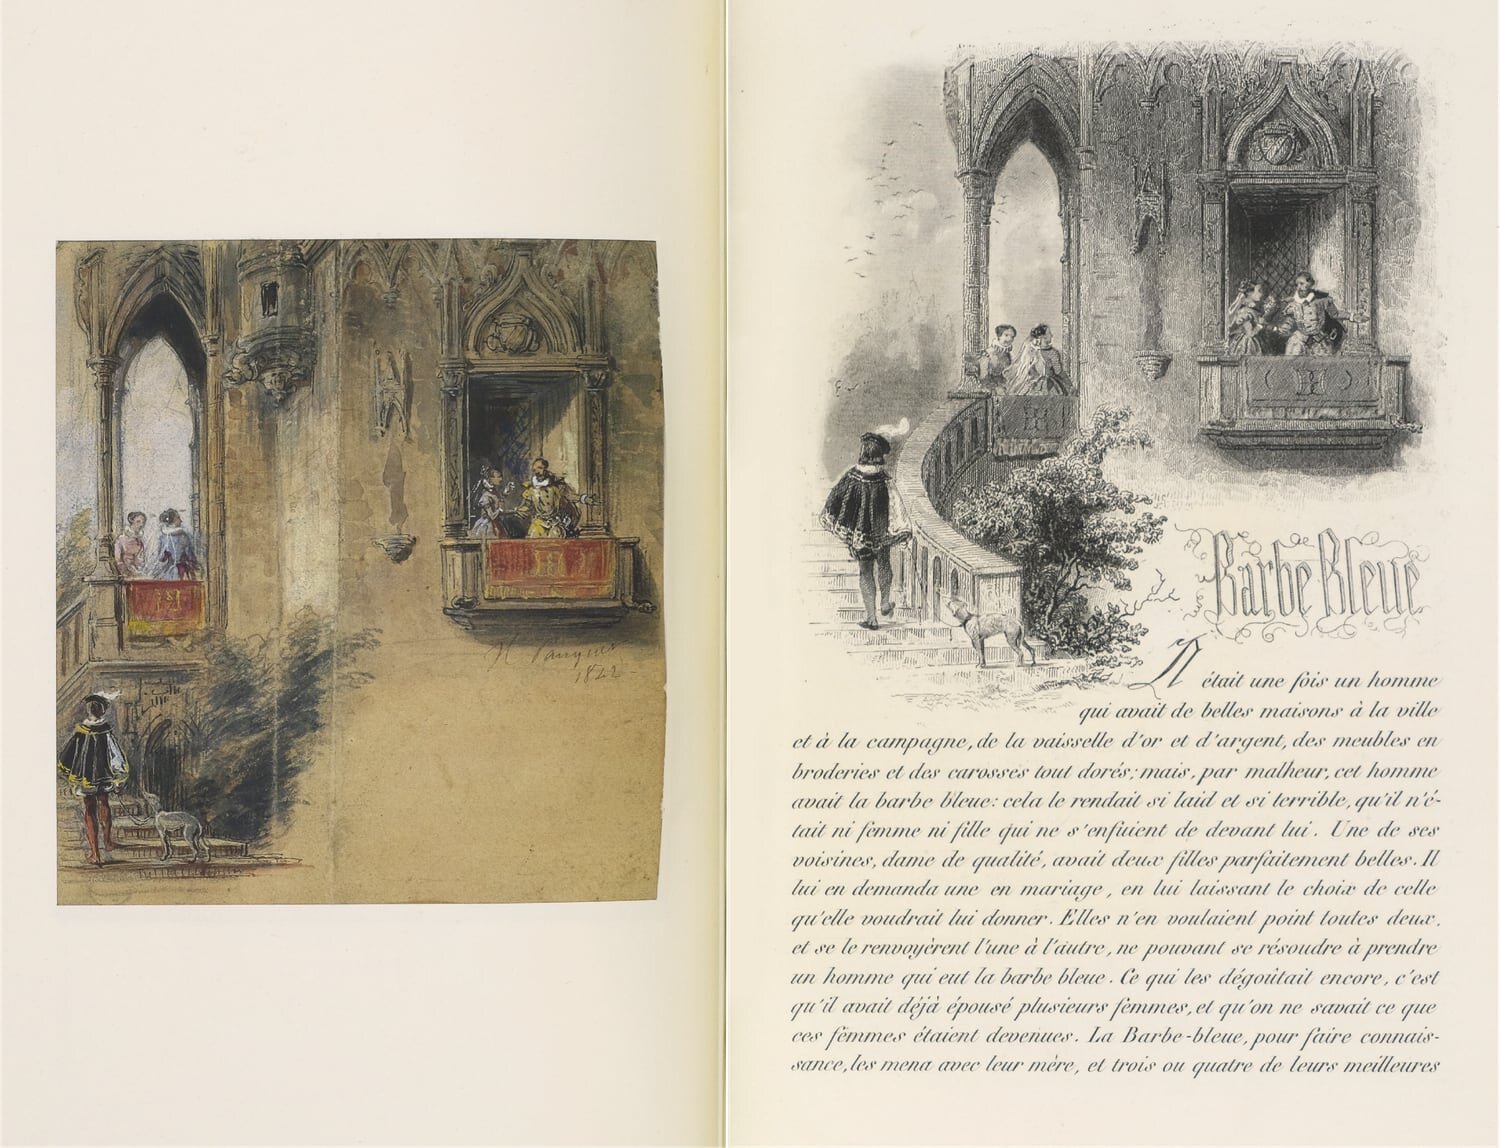  Watercolours by Hippolyte Pauquet for Charles Perrault’s  Tales and Stories of the Past with Morals (Histoires ou contes du temps passé)  [no. 494]. 